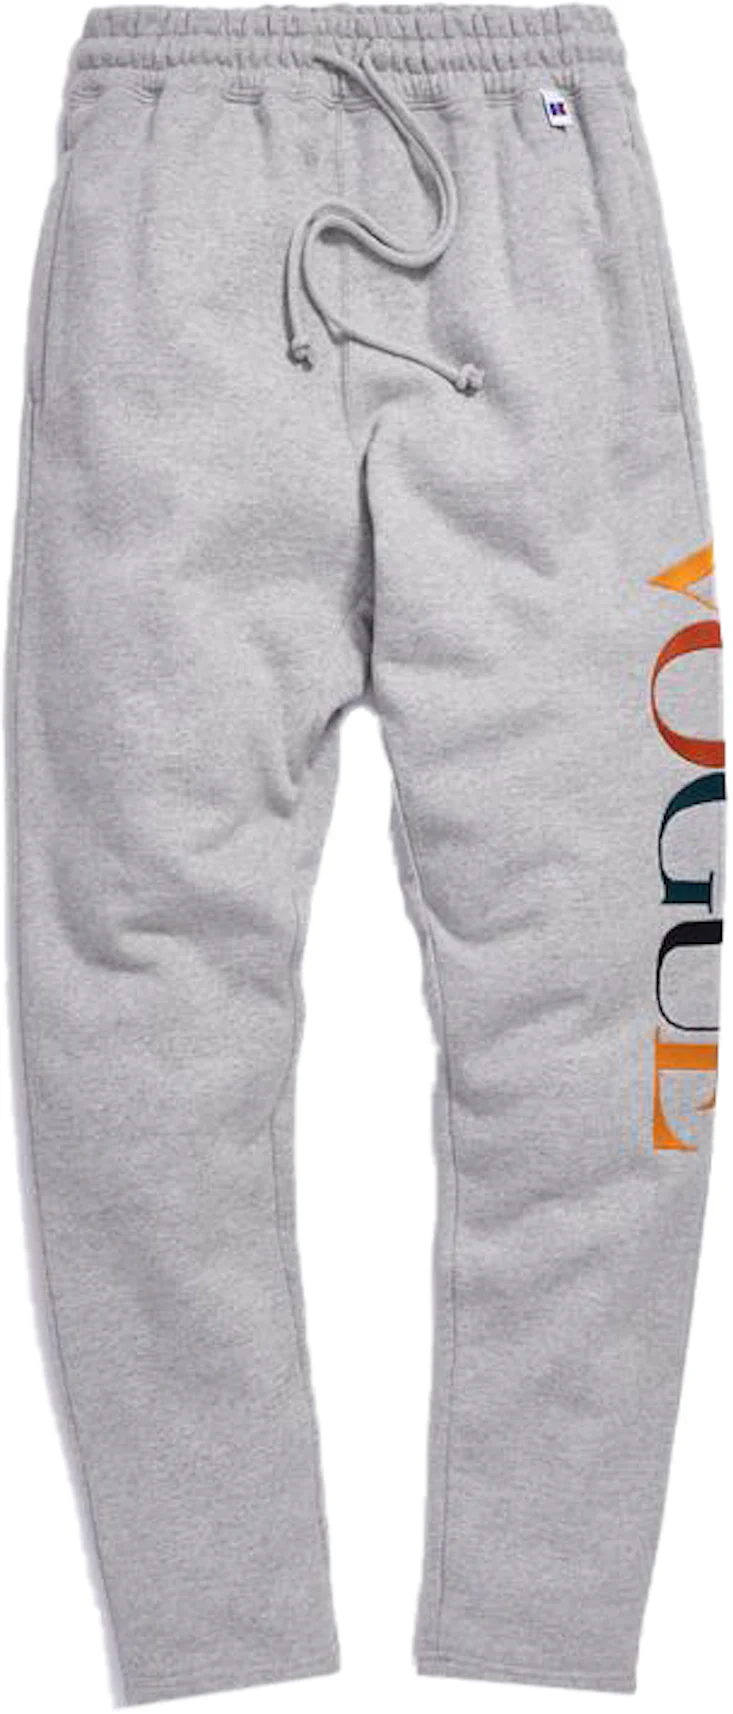 https://images.stockx.com/images/Kith-x-Russell-Athletic-x-Vogue-Williams-Soho-Sweatpant-Heather-Grey.png?fit=fill&bg=FFFFFF&w=1200&h=857&fm=webp&auto=compress&dpr=2&trim=color&updated_at=1637769651&q=60